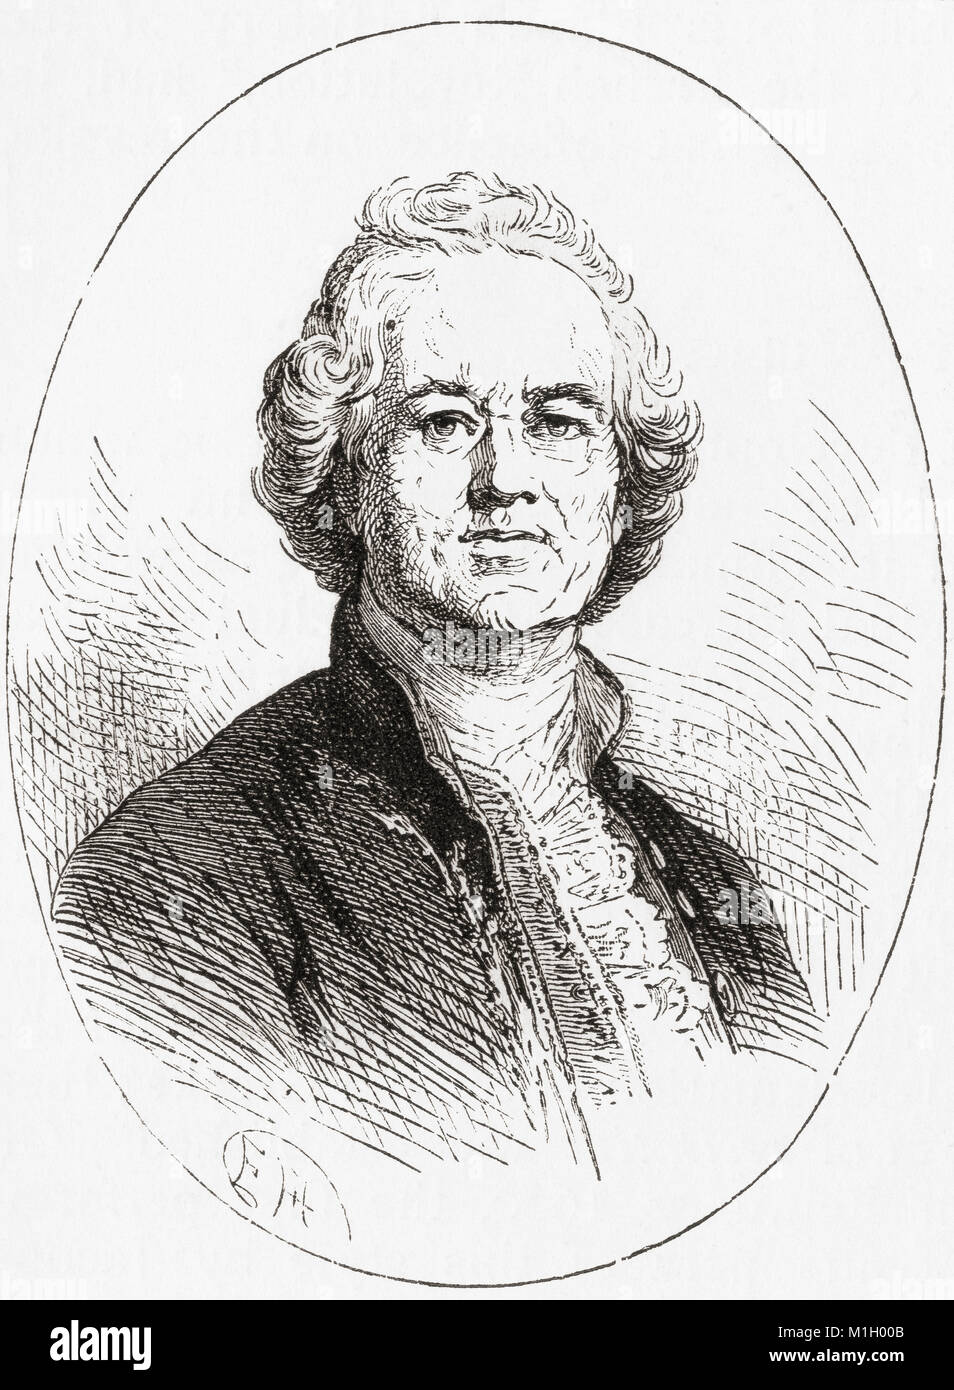 Christoph Willibald (Ritter von) Gluck, 1714 – 1787.  Composer of Italian and French opera.   From Ward and Lock's Illustrated History of the World, published c.1882. Stock Photo